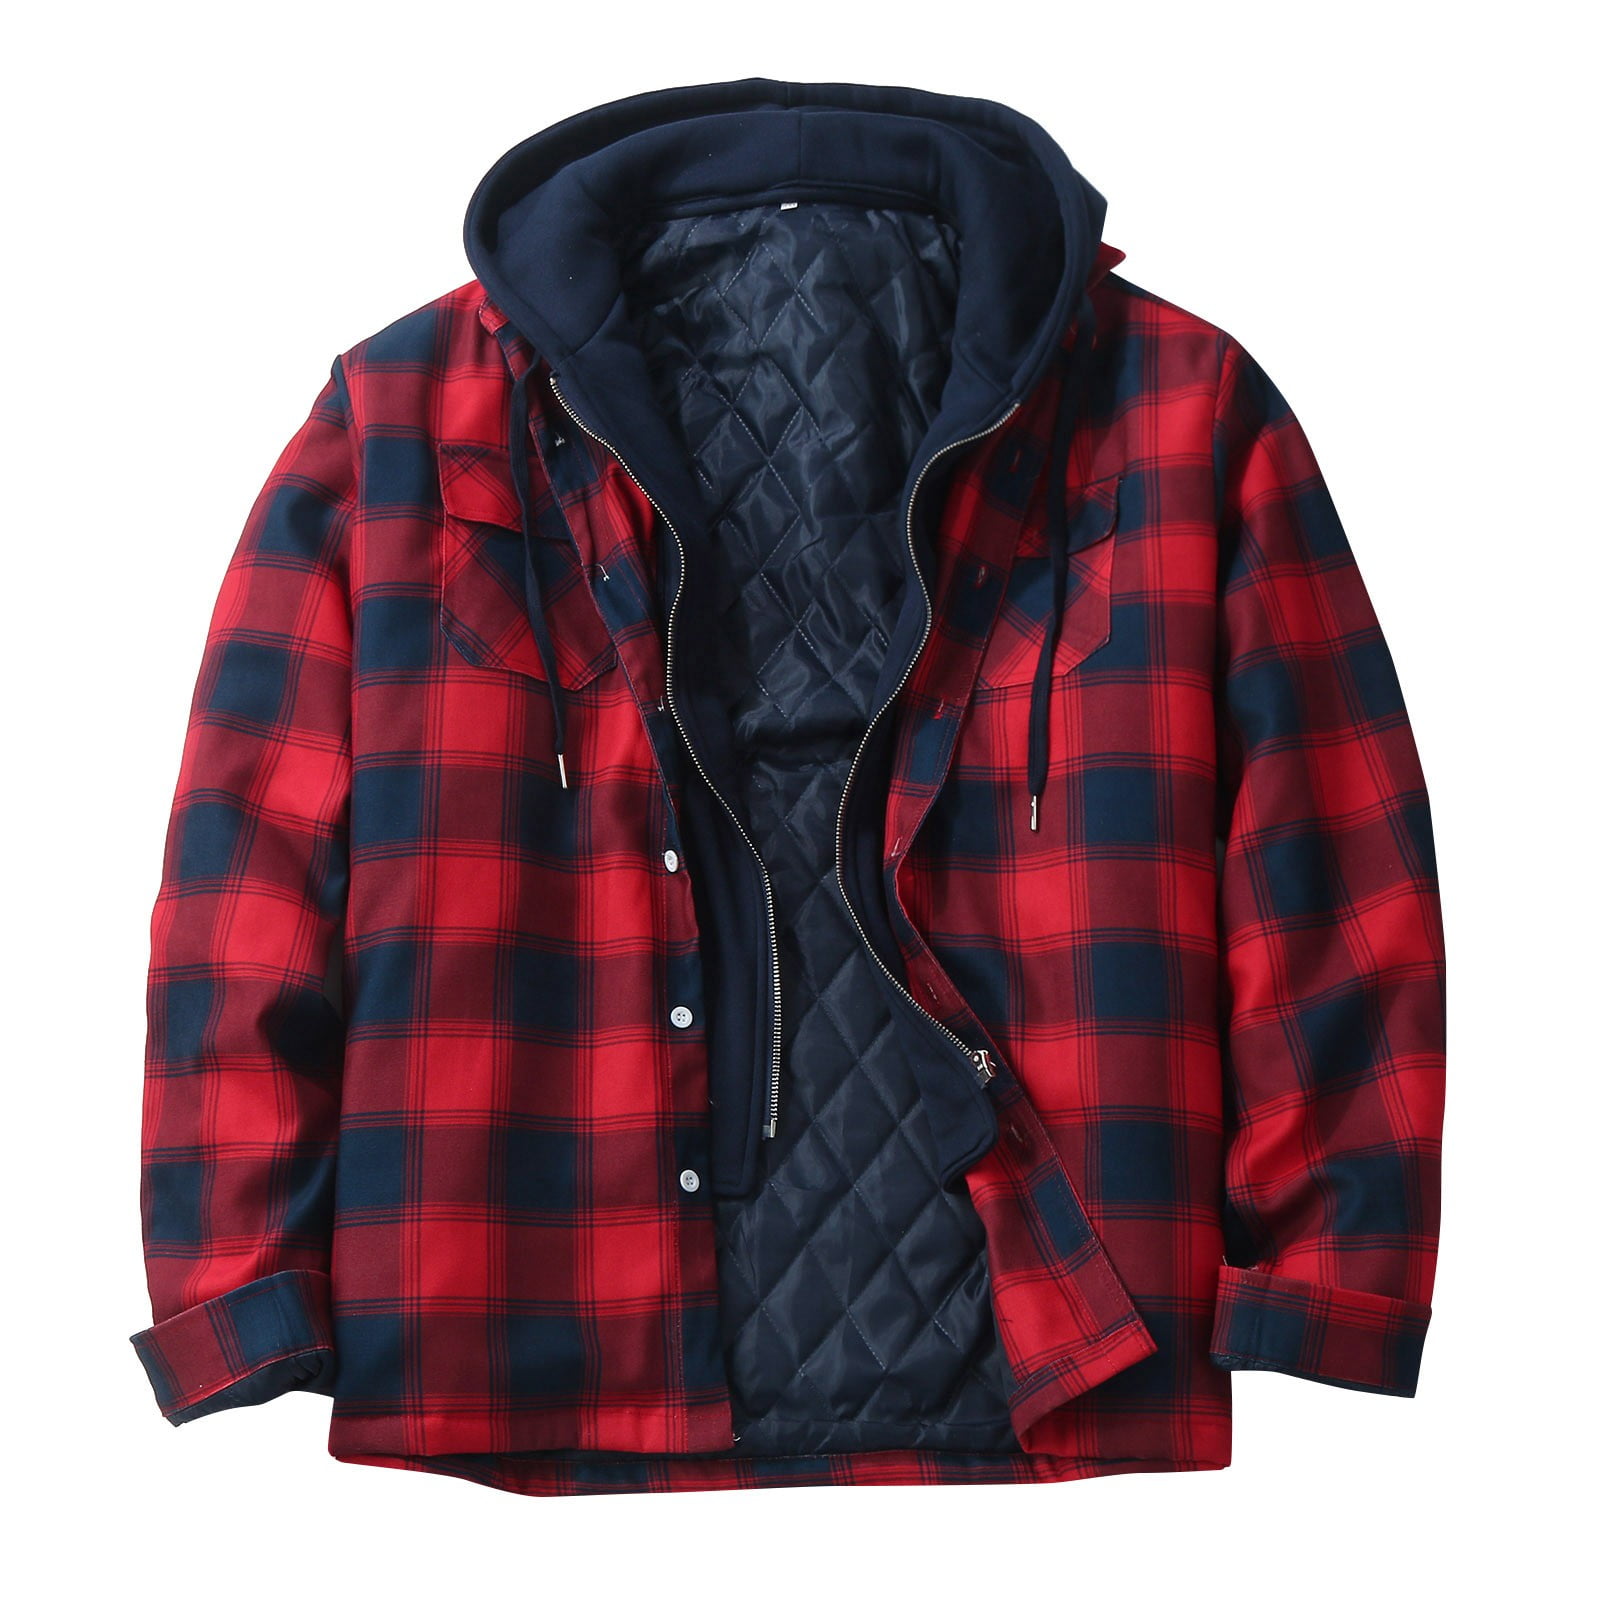 Male Autumn And Winter Warm Jacket Fashion Casual Plaid Long Sleeve ...